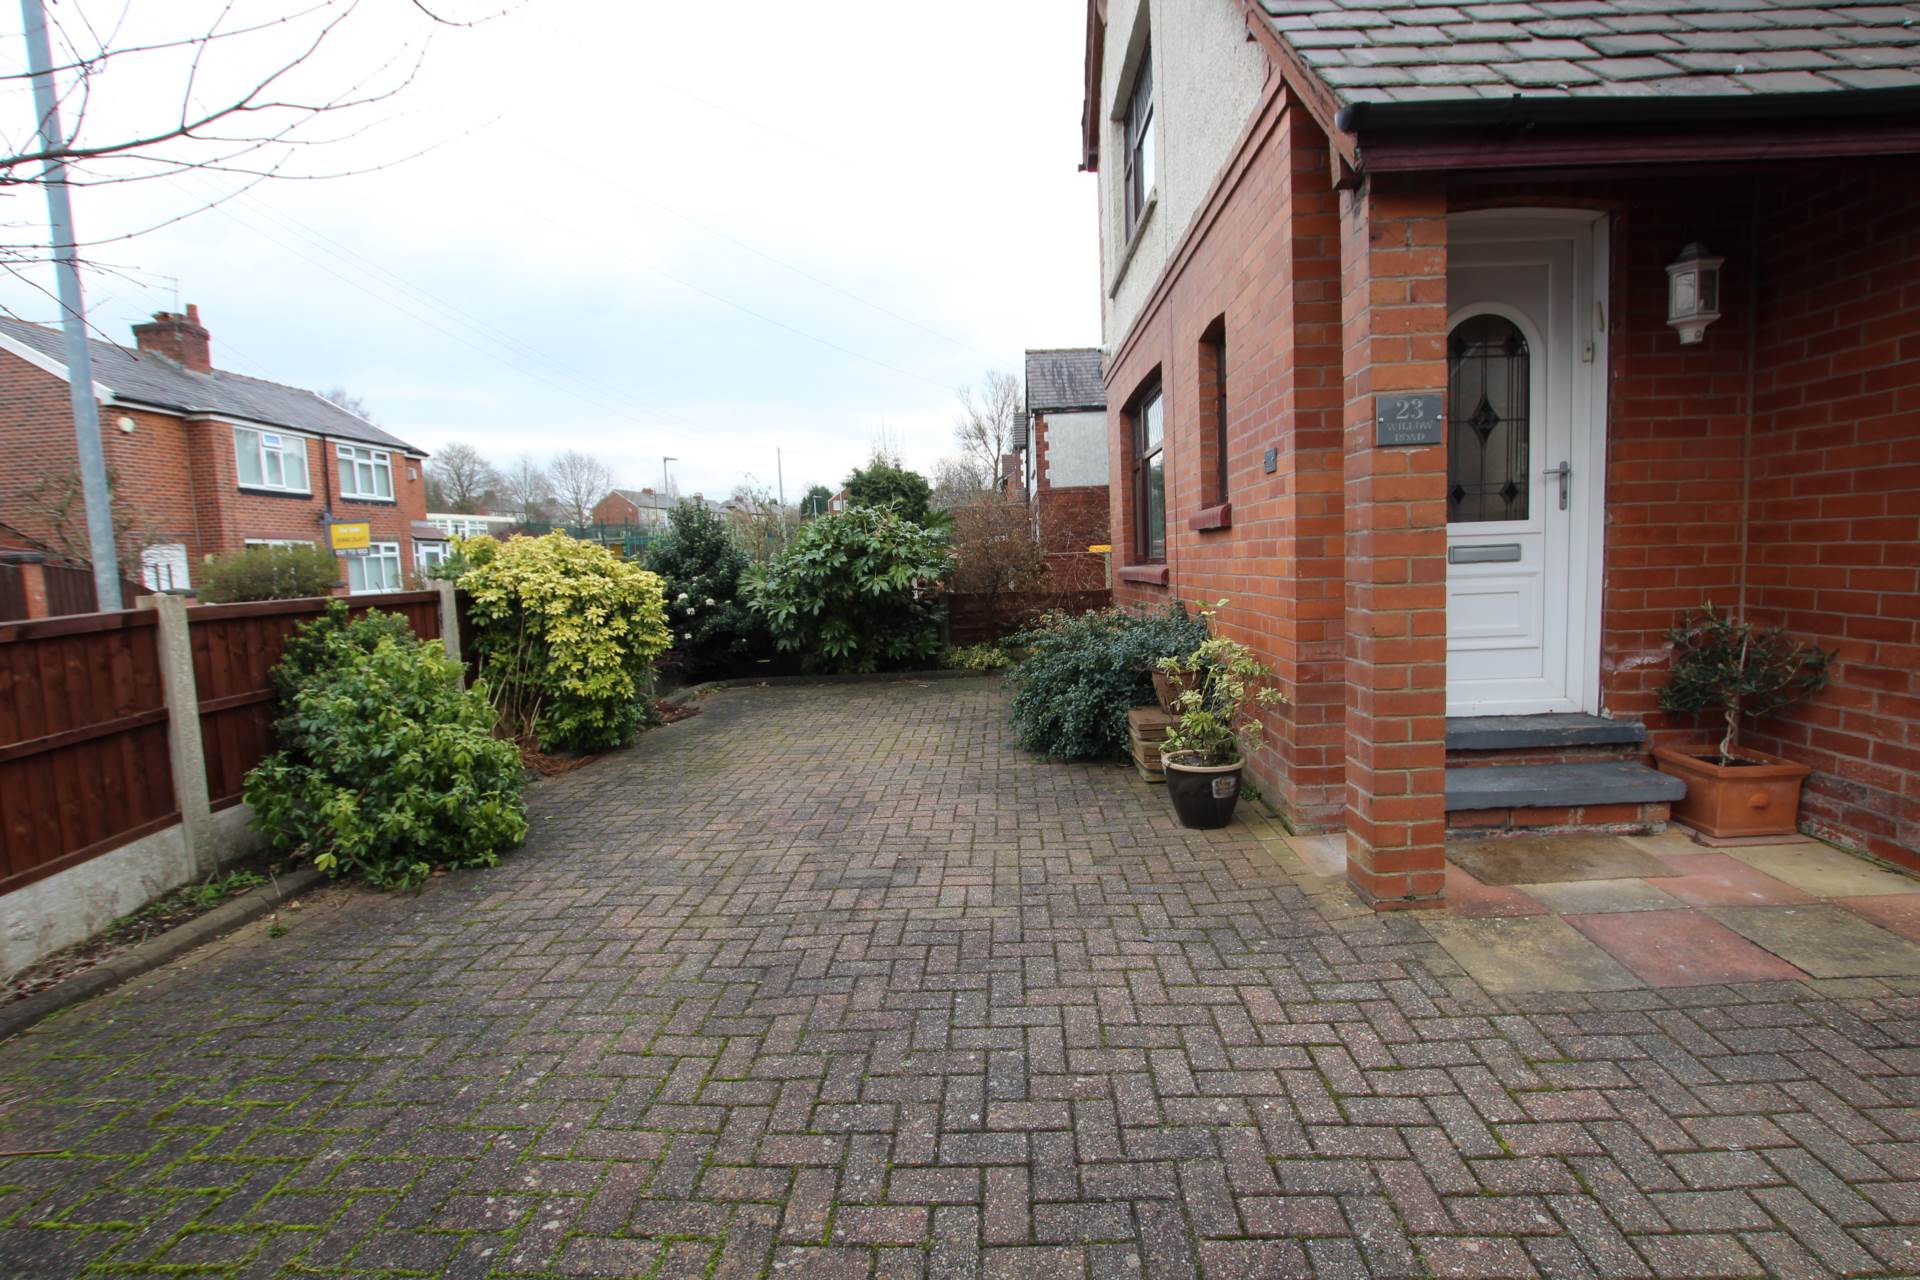 Willow Road, Prestwich, Image 16